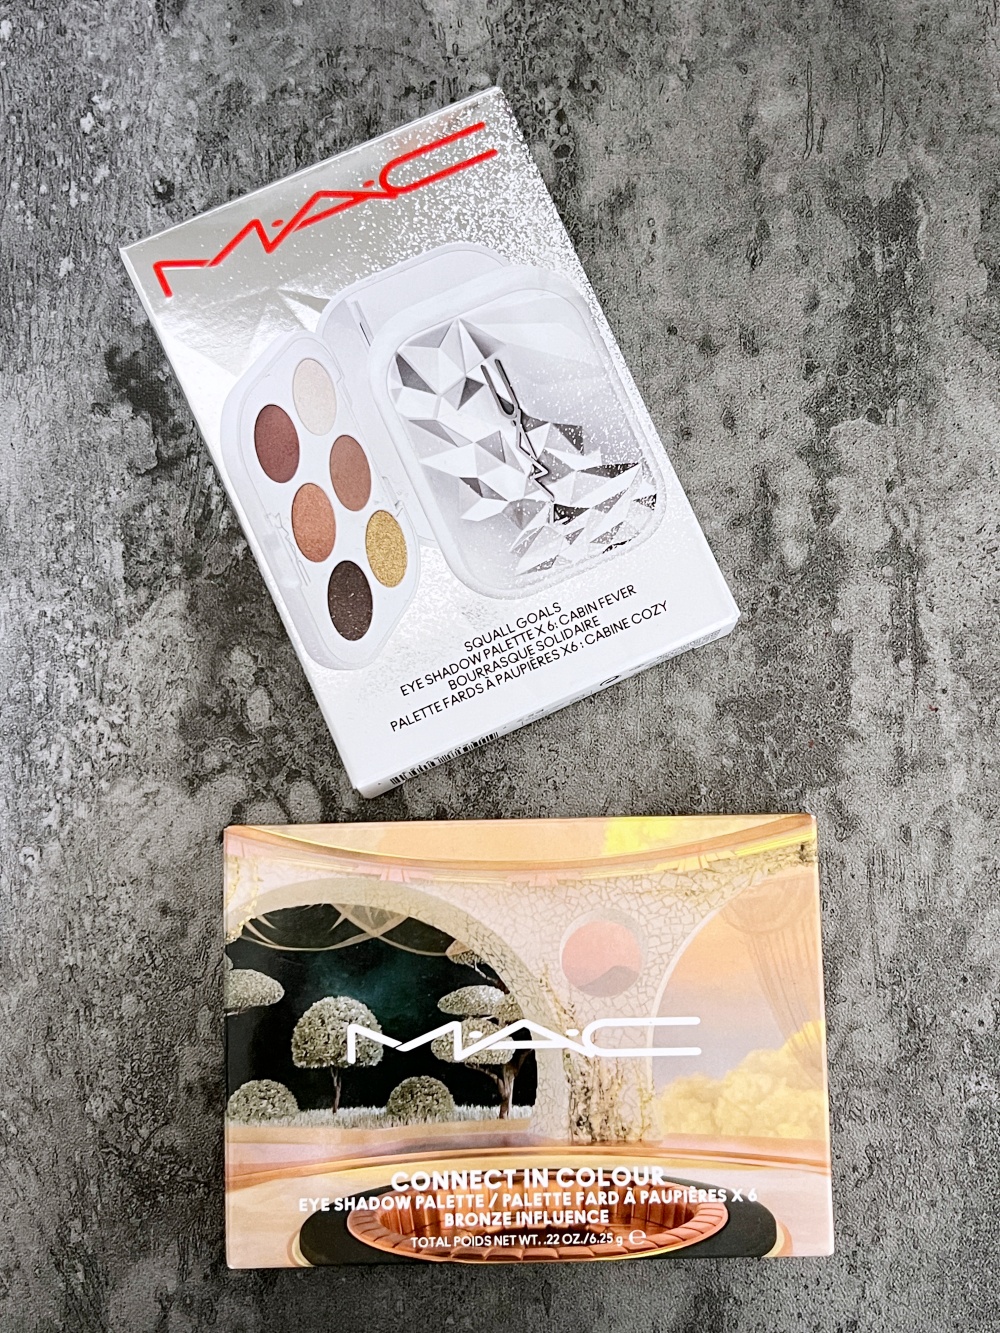 Swatches: MAC Squall Goals Cabin Fever and MAC Connect in Colour Bronze Influence